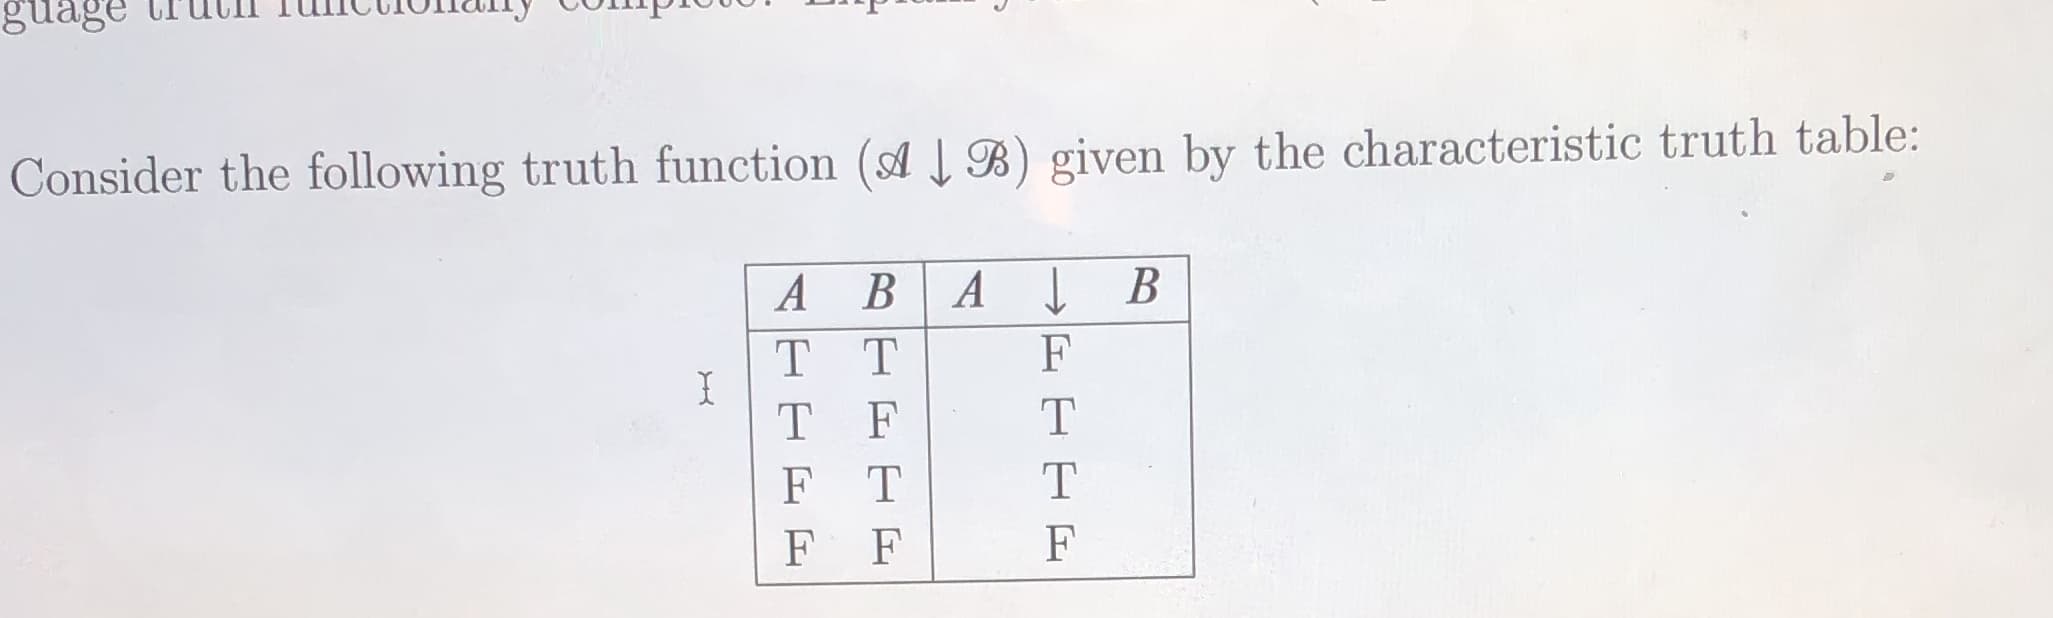 Consider the following truth function (A Į B) given by the characteristic truth table:
А В
T T
А
F
F
F
F
F
F
